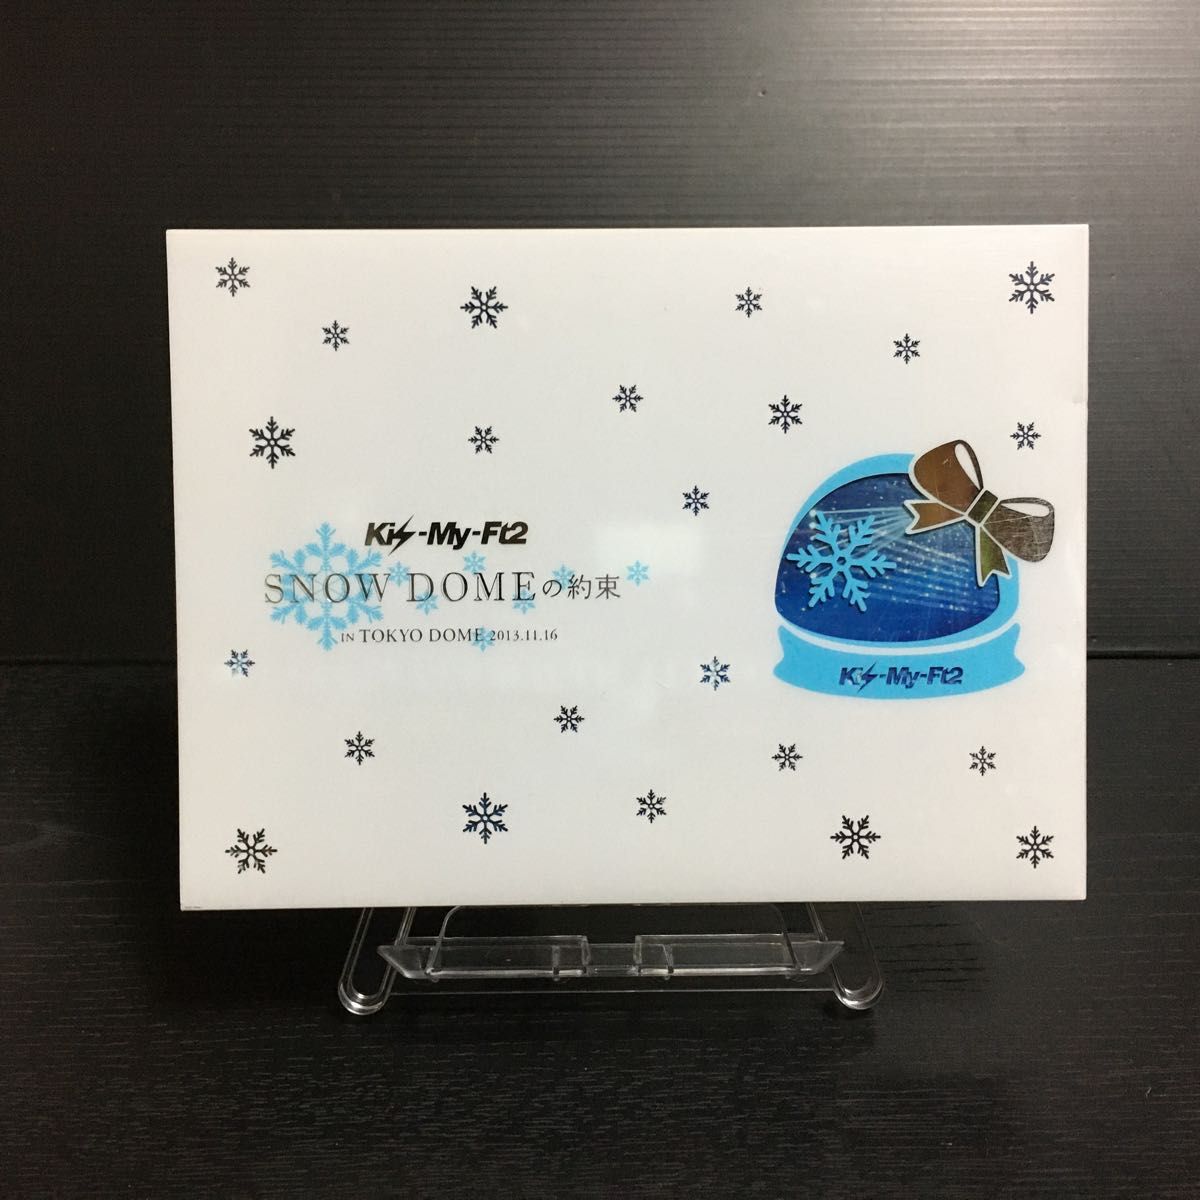 Kis-My-Ft2 SNOW DOMEの約束 Kis-My-MiNT Tour at 東京ドーム〈初回生産限定盤・2枚組〉